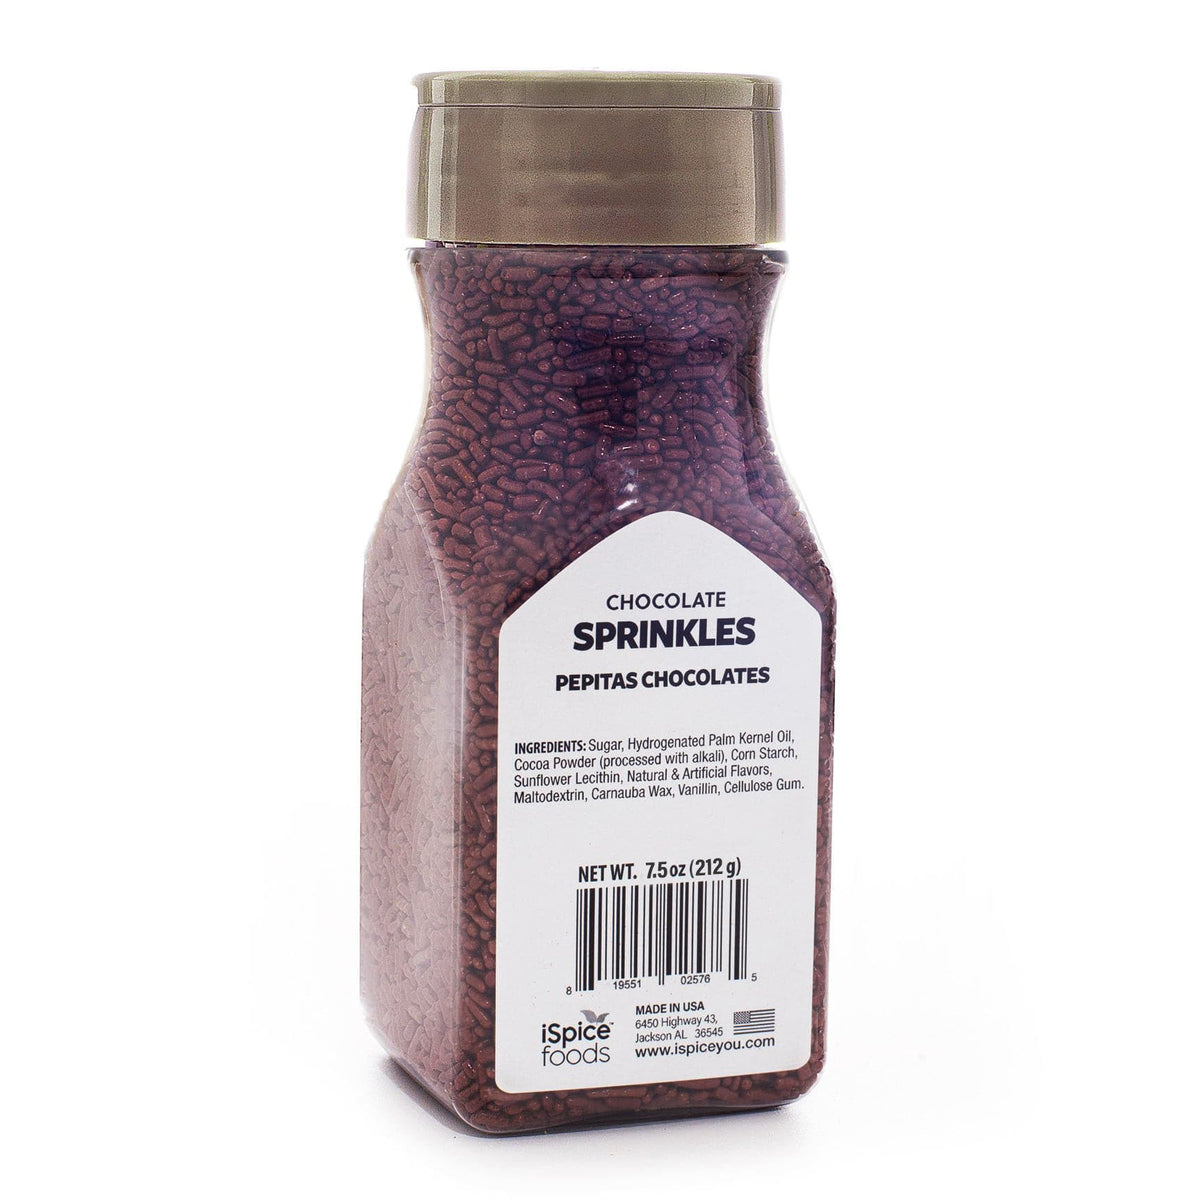 Chocolate Sprinkles - The Perfect Topping for Any Treat